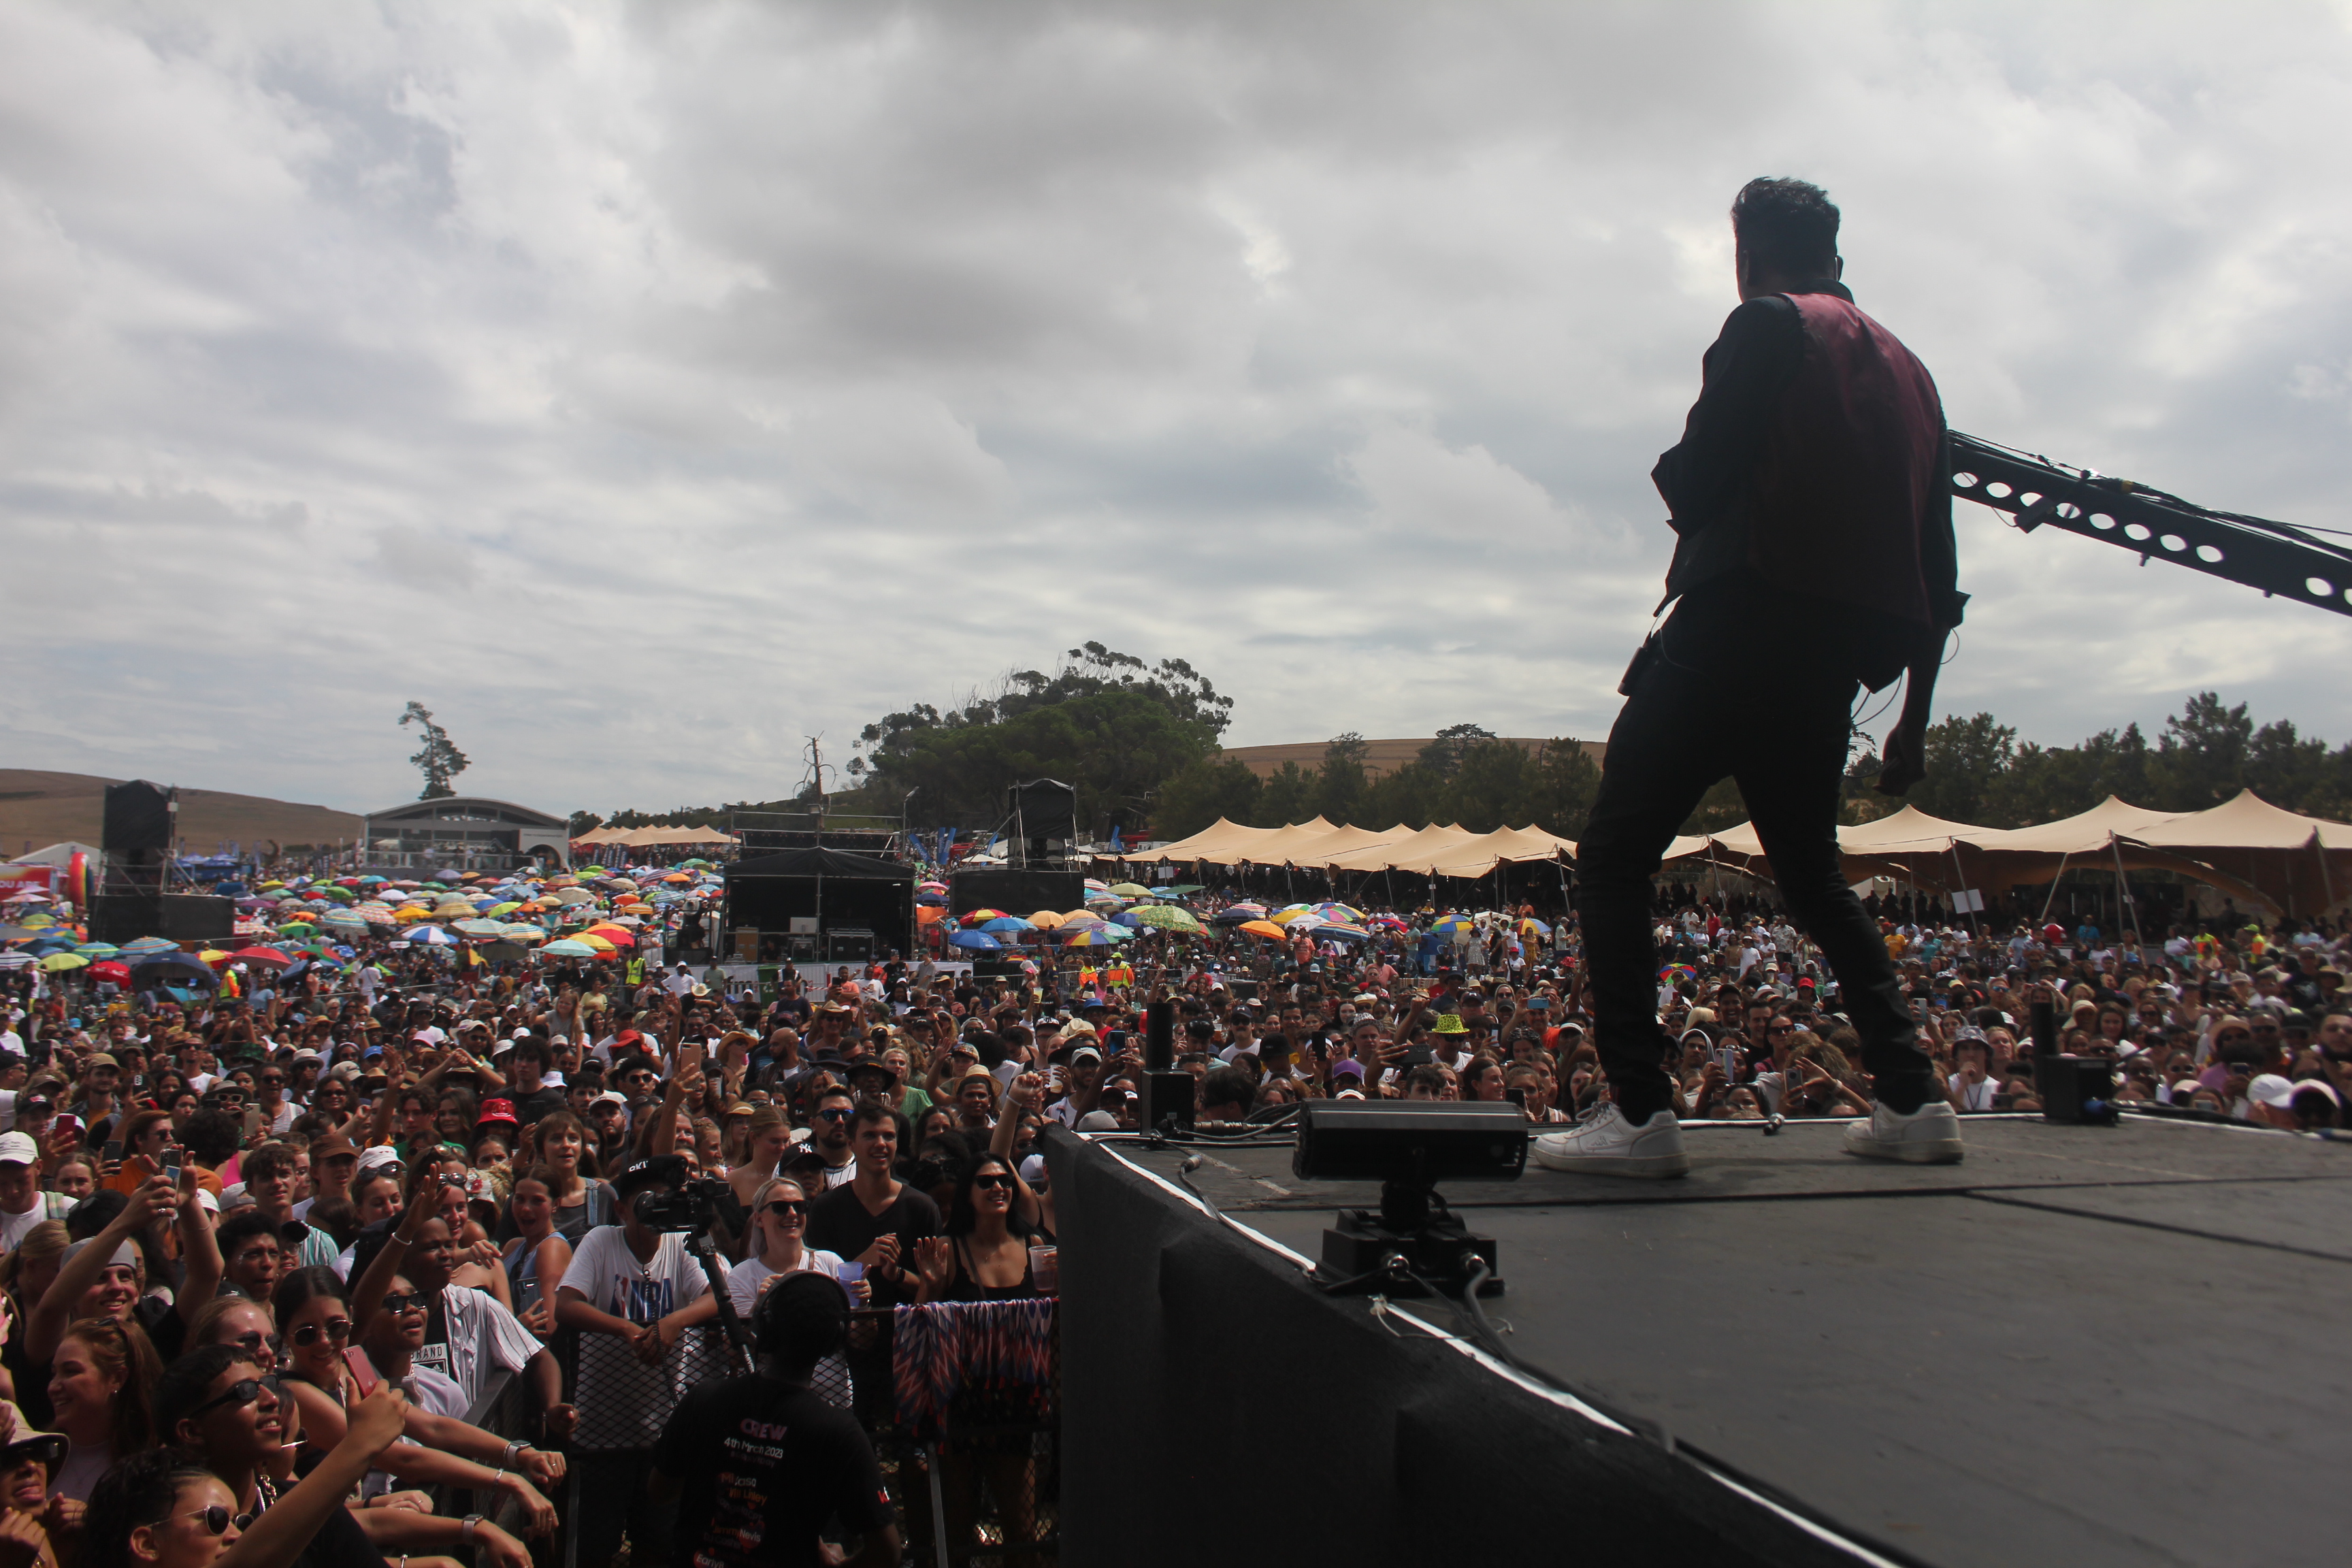 Emo Adams commands the crowd at the Galaxy KDay Festival. Image: An Wentzel